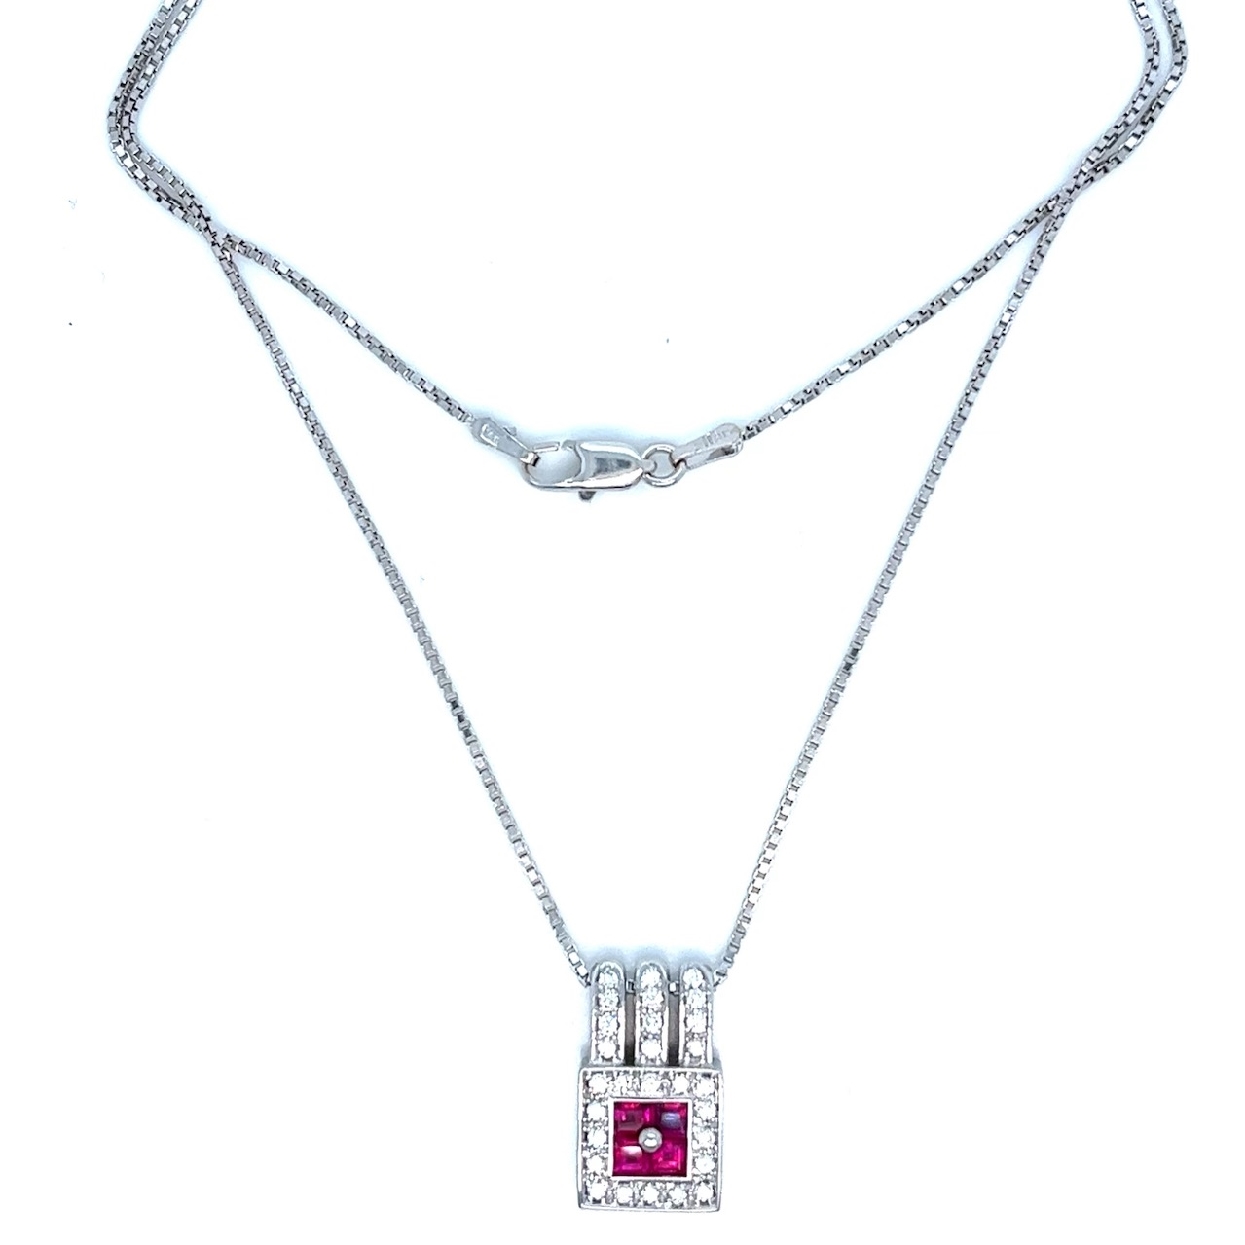 14K White Gold Square Cut Ruby and Diamond Necklace 18 Inches 